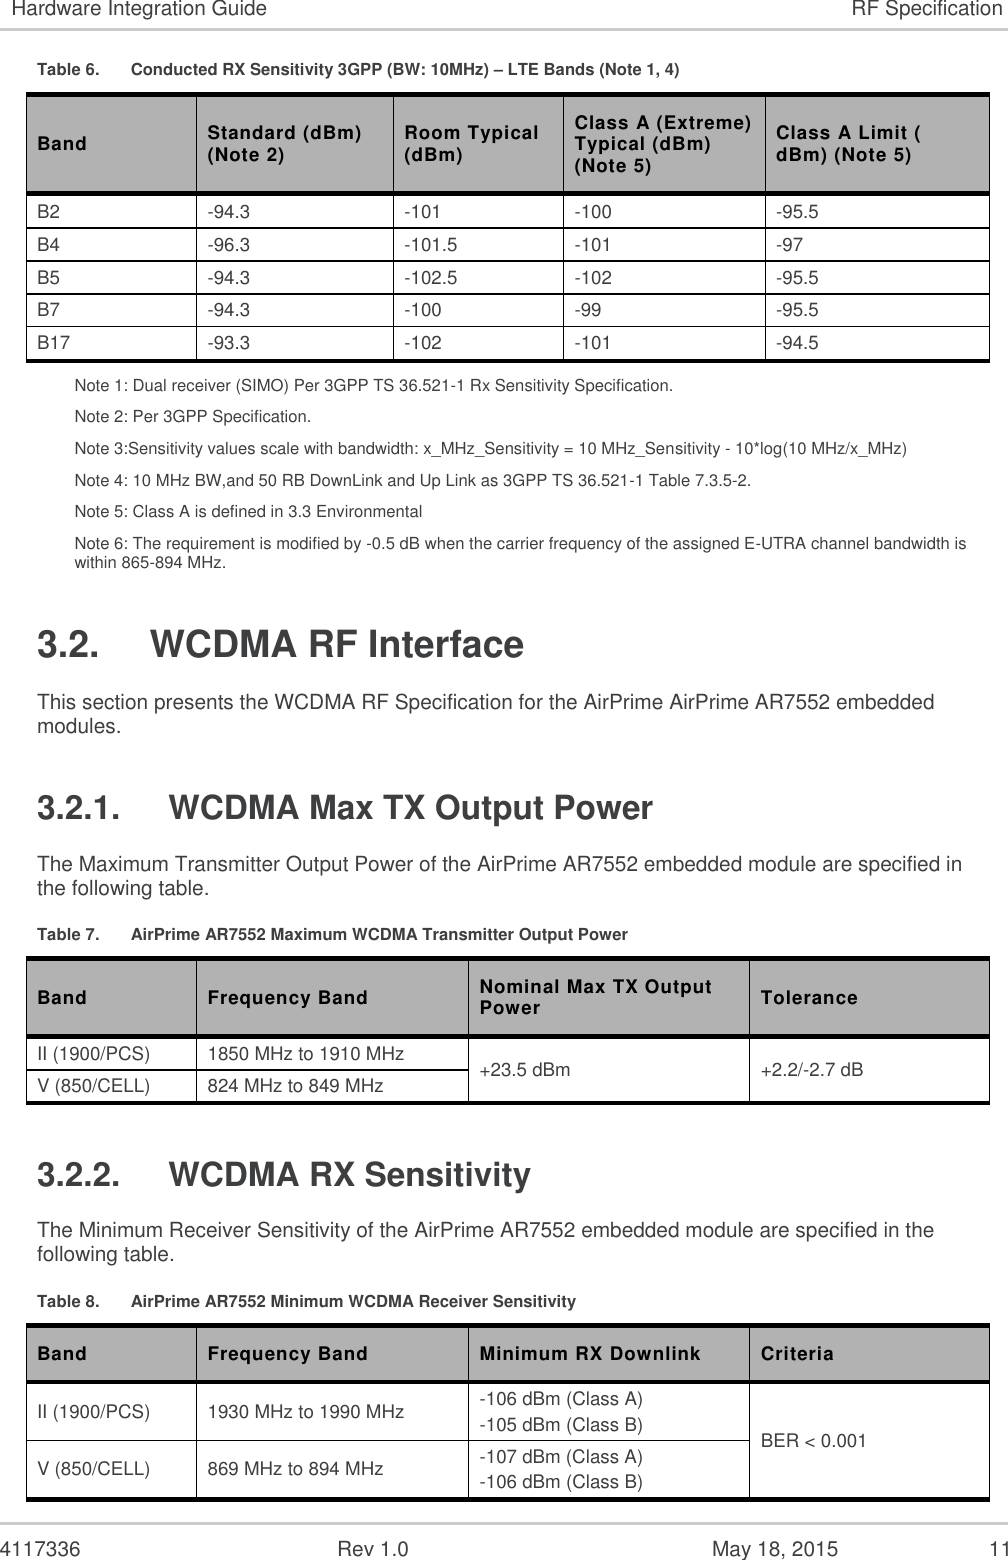   4117336  Rev 1.0  May 18, 2015  11 Hardware Integration Guide RF Specification Table 6.  Conducted RX Sensitivity 3GPP (BW: 10MHz) – LTE Bands (Note 1, 4) Band Standard (dBm) (Note 2) Room Typical (dBm) Class A (Extreme) Typical (dBm) (Note 5) Class A Limit ( dBm) (Note 5) B2 -94.3 -101 -100 -95.5 B4 -96.3 -101.5 -101 -97 B5 -94.3 -102.5 -102 -95.5 B7 -94.3 -100 -99 -95.5 B17 -93.3 -102 -101 -94.5 Note 1: Dual receiver (SIMO) Per 3GPP TS 36.521-1 Rx Sensitivity Specification. Note 2: Per 3GPP Specification. Note 3:Sensitivity values scale with bandwidth: x_MHz_Sensitivity = 10 MHz_Sensitivity - 10*log(10 MHz/x_MHz) Note 4: 10 MHz BW,and 50 RB DownLink and Up Link as 3GPP TS 36.521-1 Table 7.3.5-2. Note 5: Class A is defined in 3.3 Environmental Note 6: The requirement is modified by -0.5 dB when the carrier frequency of the assigned E-UTRA channel bandwidth is within 865-894 MHz. 3.2.  WCDMA RF Interface This section presents the WCDMA RF Specification for the AirPrime AirPrime AR7552 embedded modules. 3.2.1.  WCDMA Max TX Output Power The Maximum Transmitter Output Power of the AirPrime AR7552 embedded module are specified in the following table. Table 7.  AirPrime AR7552 Maximum WCDMA Transmitter Output Power Band Frequency Band Nominal Max TX Output Power Tolerance II (1900/PCS) 1850 MHz to 1910 MHz +23.5 dBm +2.2/-2.7 dB  V (850/CELL) 824 MHz to 849 MHz 3.2.2.  WCDMA RX Sensitivity The Minimum Receiver Sensitivity of the AirPrime AR7552 embedded module are specified in the following table. Table 8.  AirPrime AR7552 Minimum WCDMA Receiver Sensitivity Band Frequency Band Minimum RX Downlink Criteria II (1900/PCS) 1930 MHz to 1990 MHz -106 dBm (Class A) -105 dBm (Class B) BER &lt; 0.001 V (850/CELL) 869 MHz to 894 MHz -107 dBm (Class A) -106 dBm (Class B) 